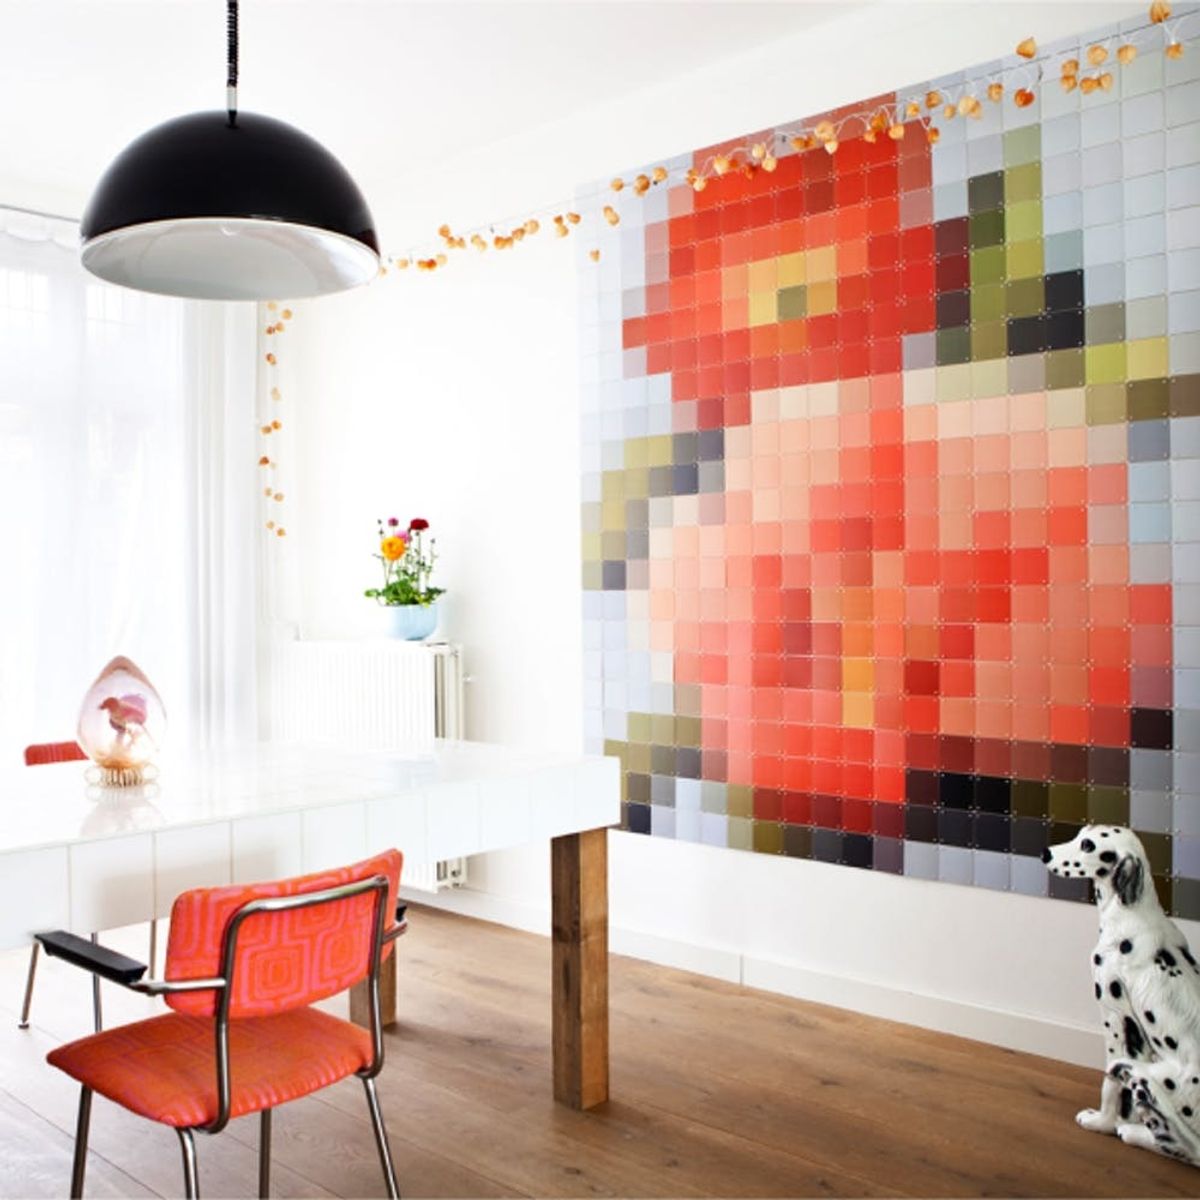 8 Pieces of Pixelated Artwork to Make Right Now